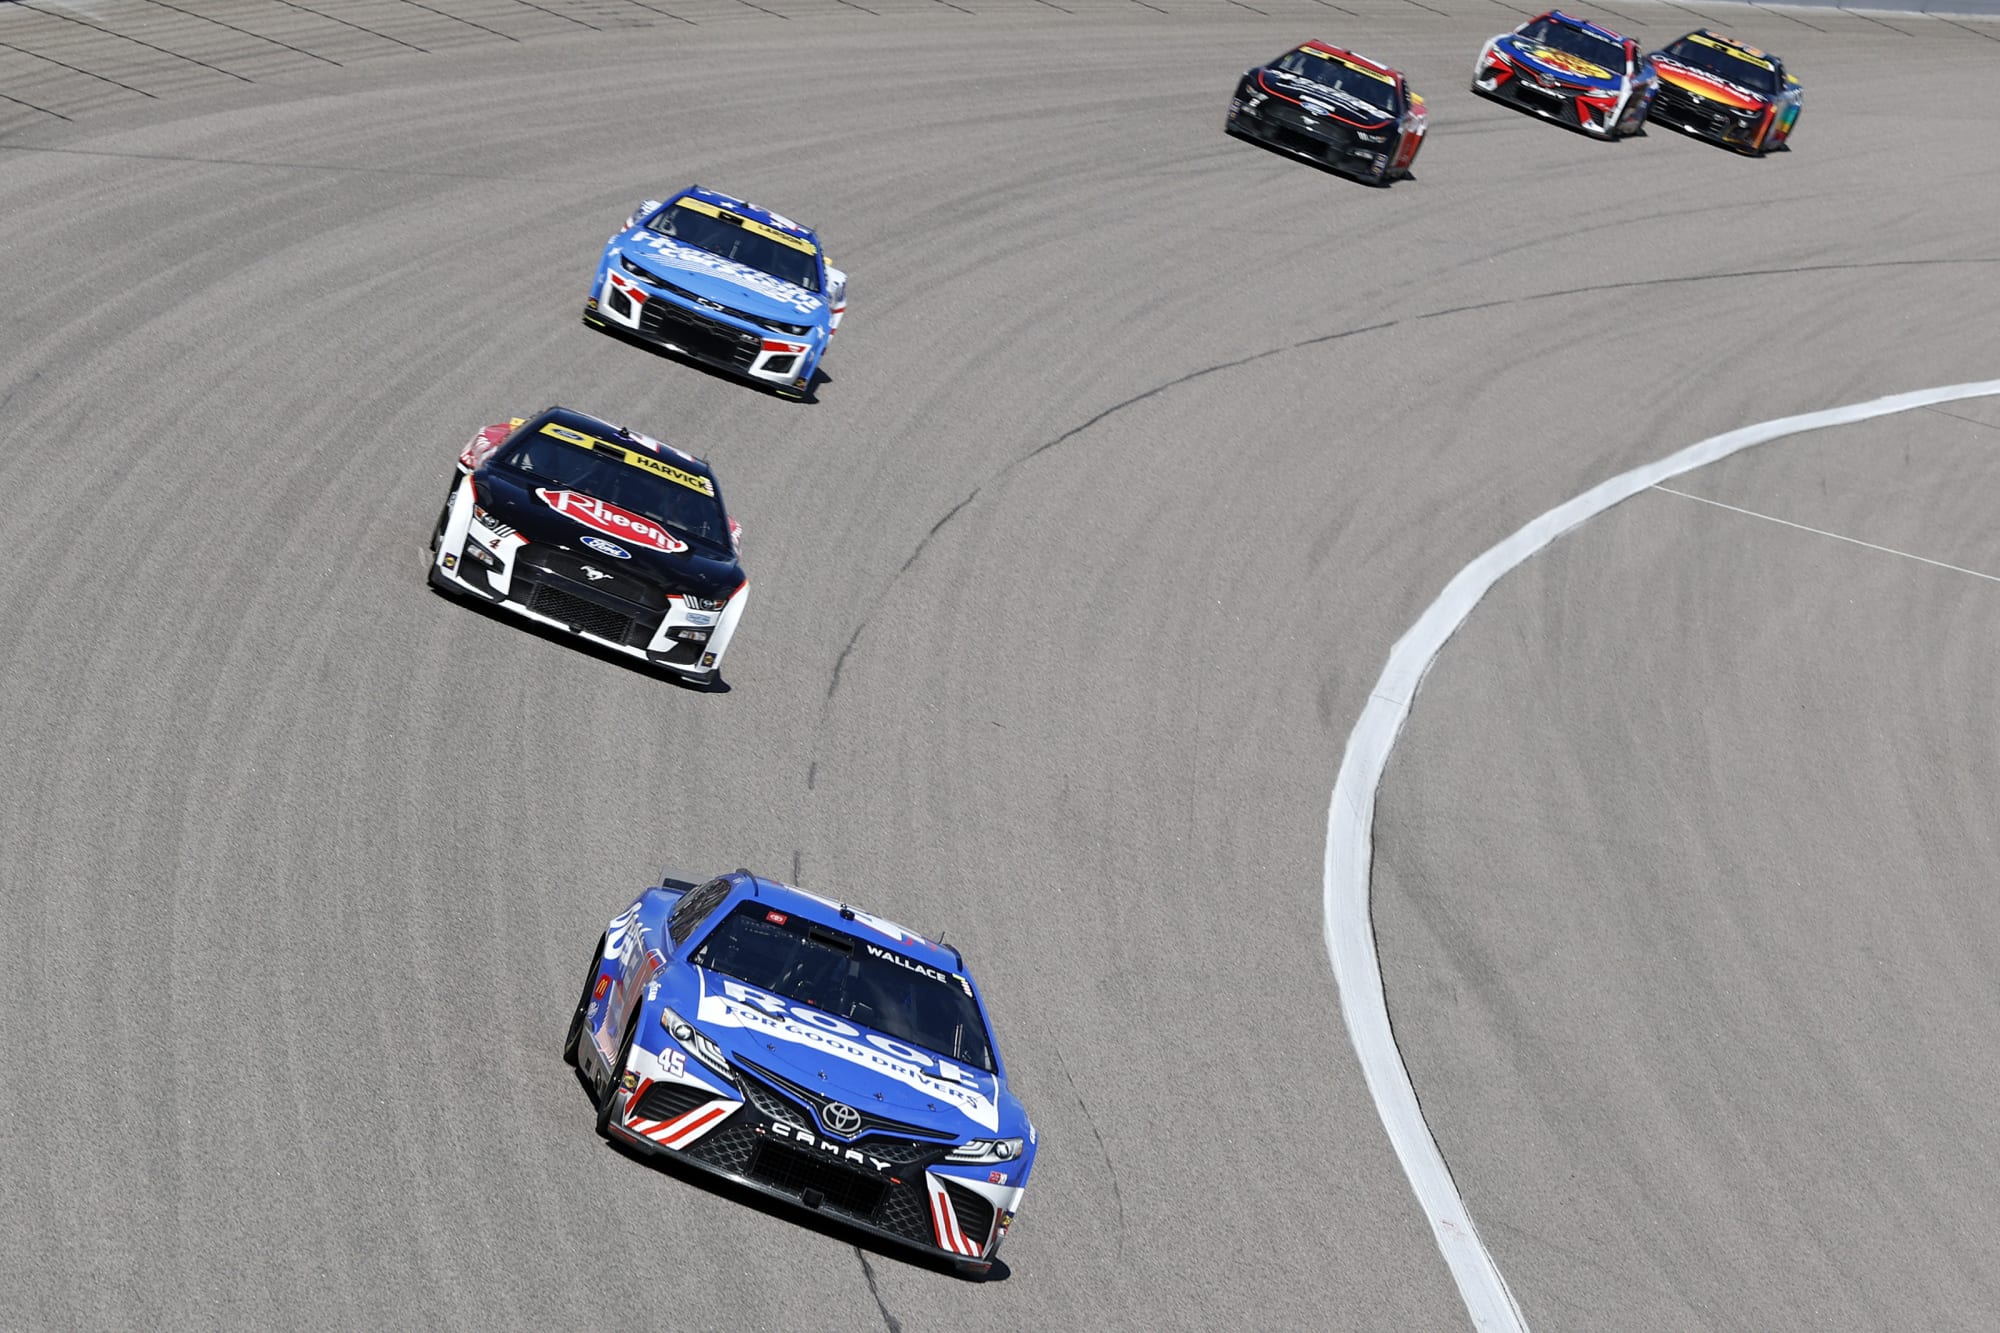 NASCAR: 2023 Cup Series schedule release date revealed